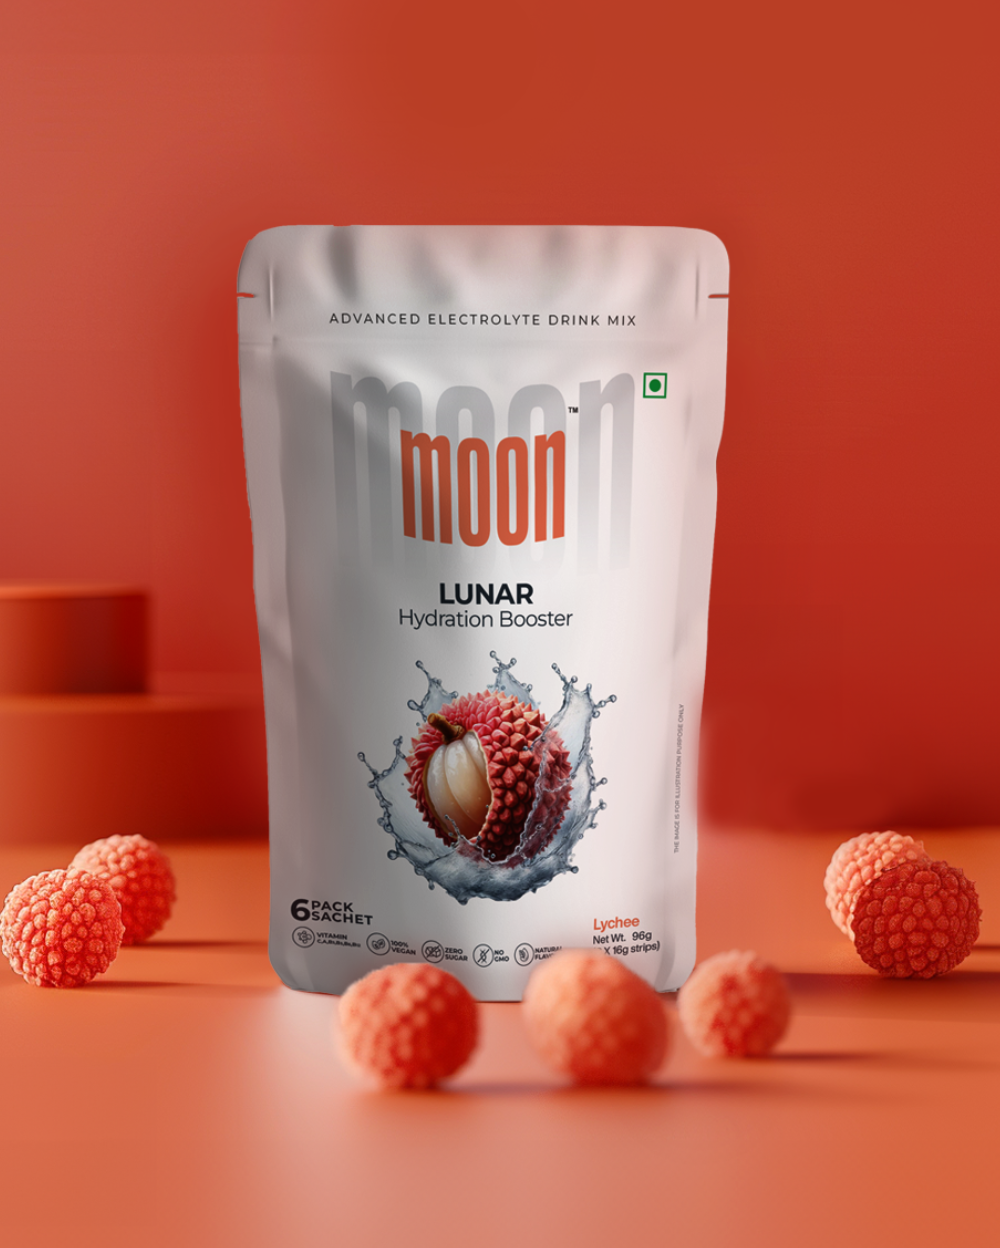 Package of Moon Lunar Strawberry + Lychee Hydration Booster electrolyte drink mix by MOONFREEZE FOODS PRIVATE LIMITED on a red background with lychee and strawberry fruits scattered around.